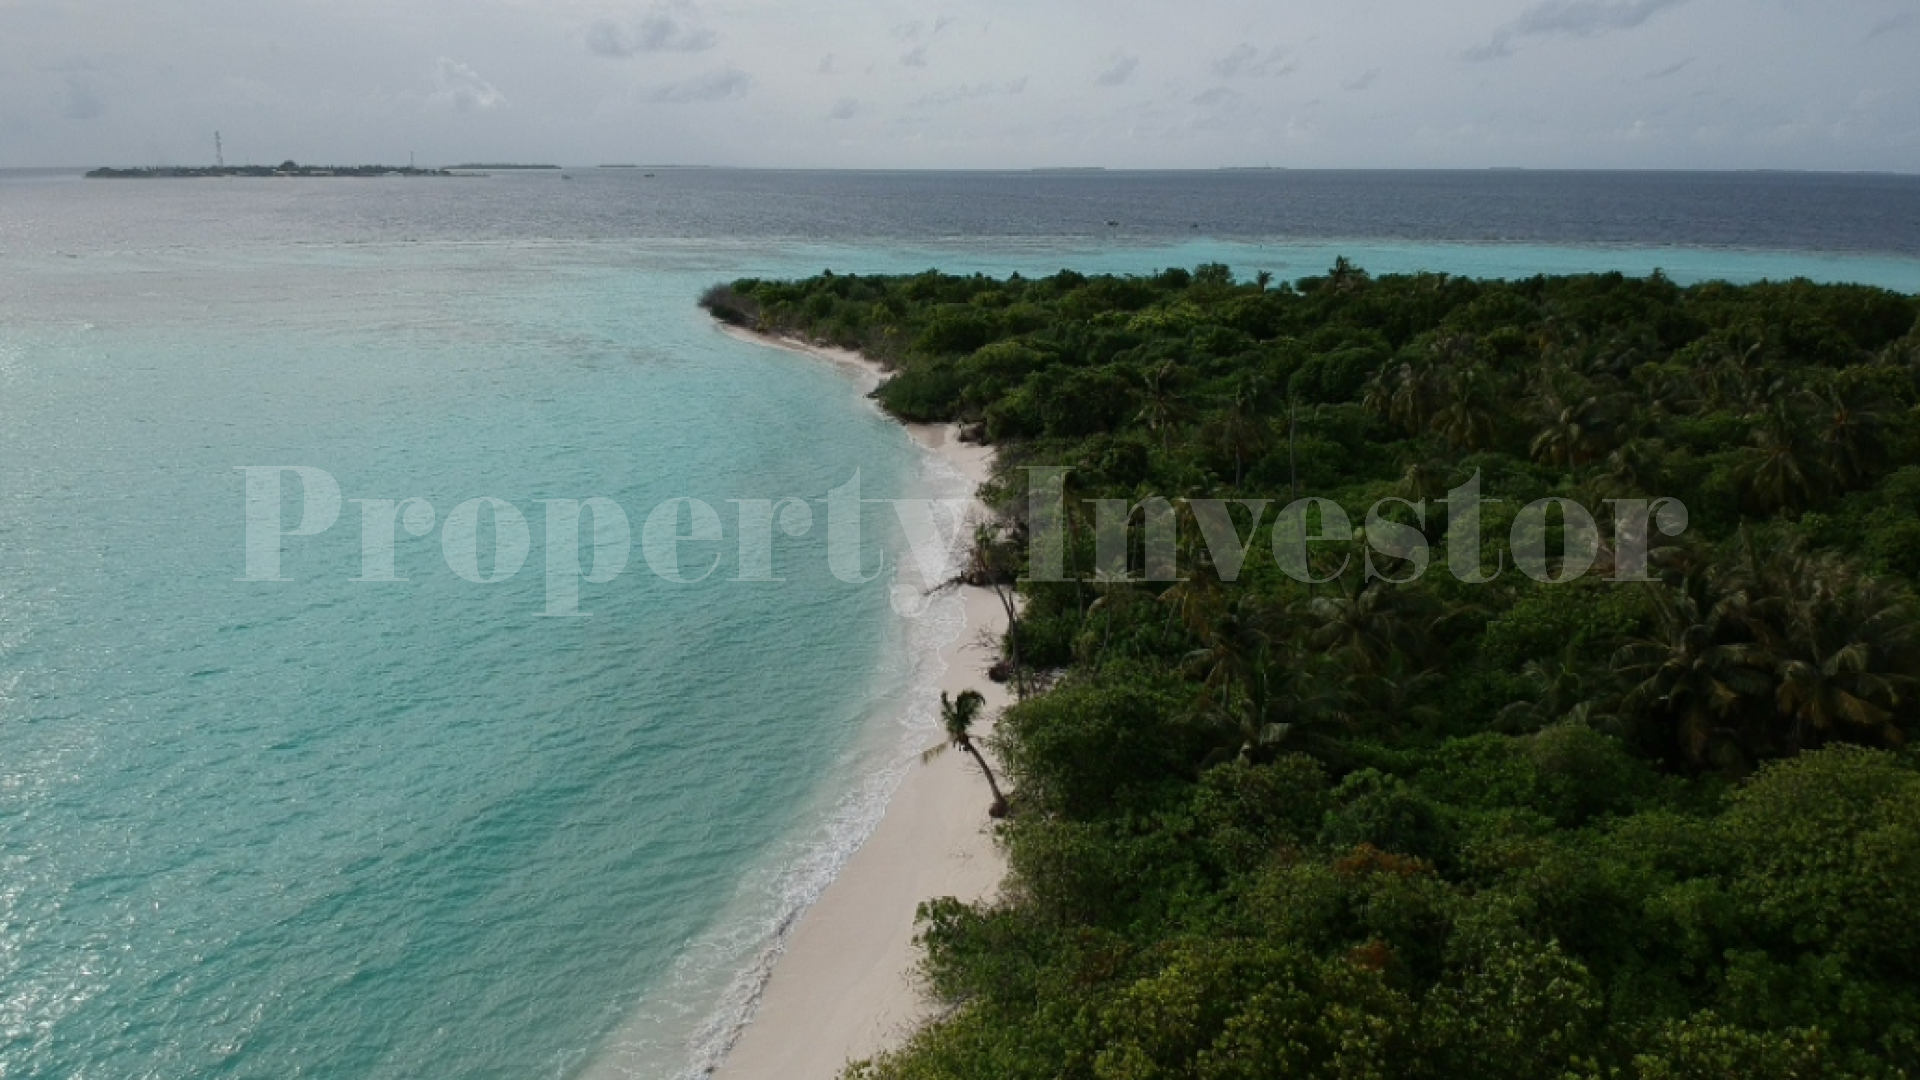 Picturesque 13 Hectare Private Virgin Island for Commercial Development in the Maldives